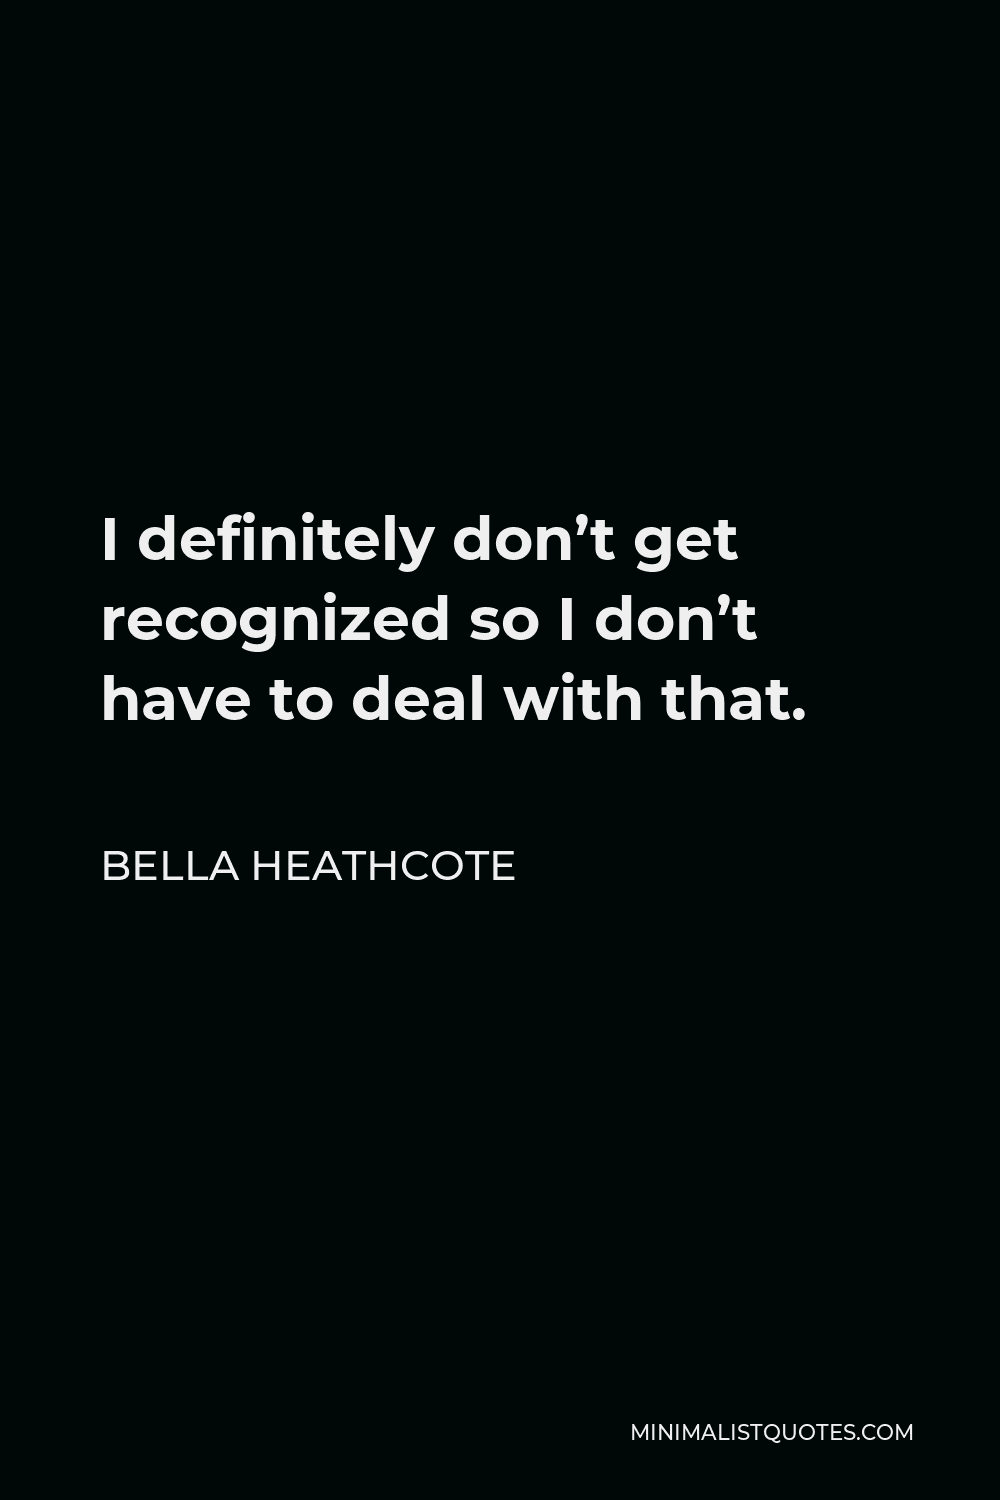 Bella Heathcote Quote - I definitely don’t get recognized so I don’t have to deal with that.